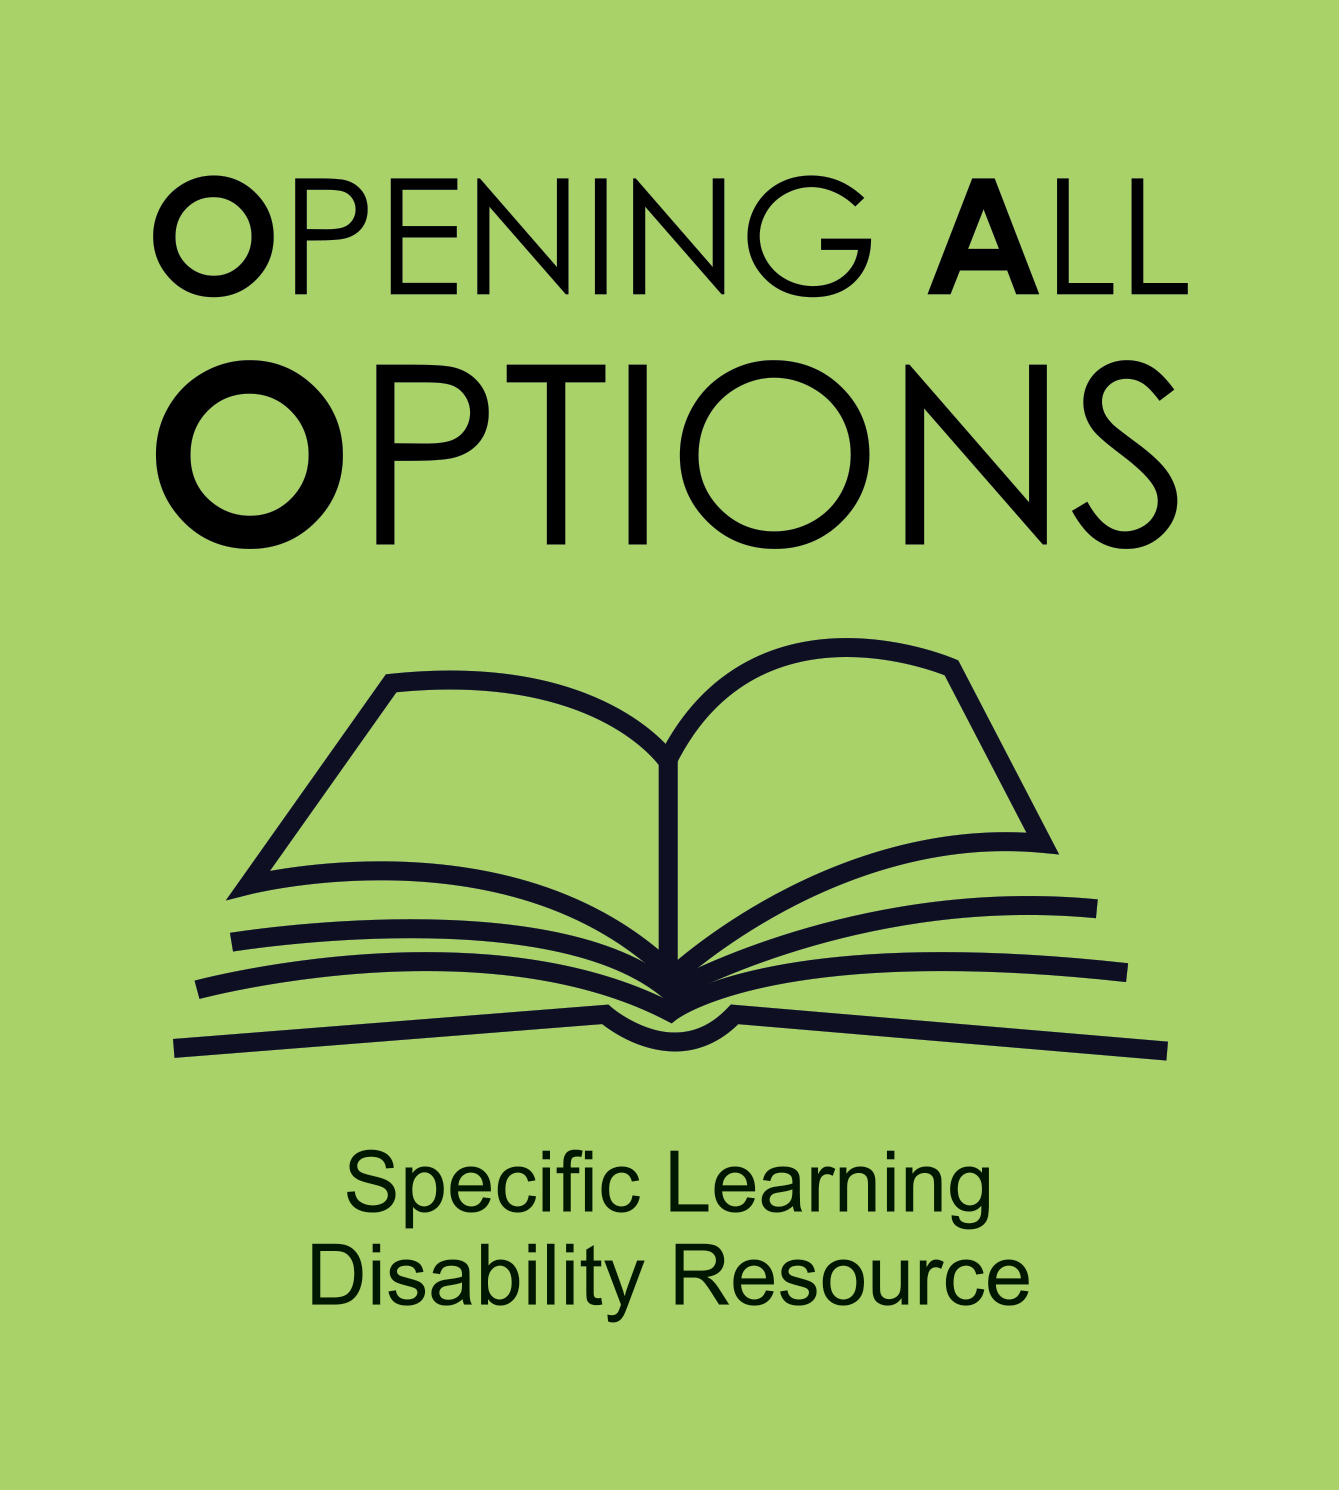 Text. Opening All Options. Specific Learning Disability Resource.  With line drawing of an open book.